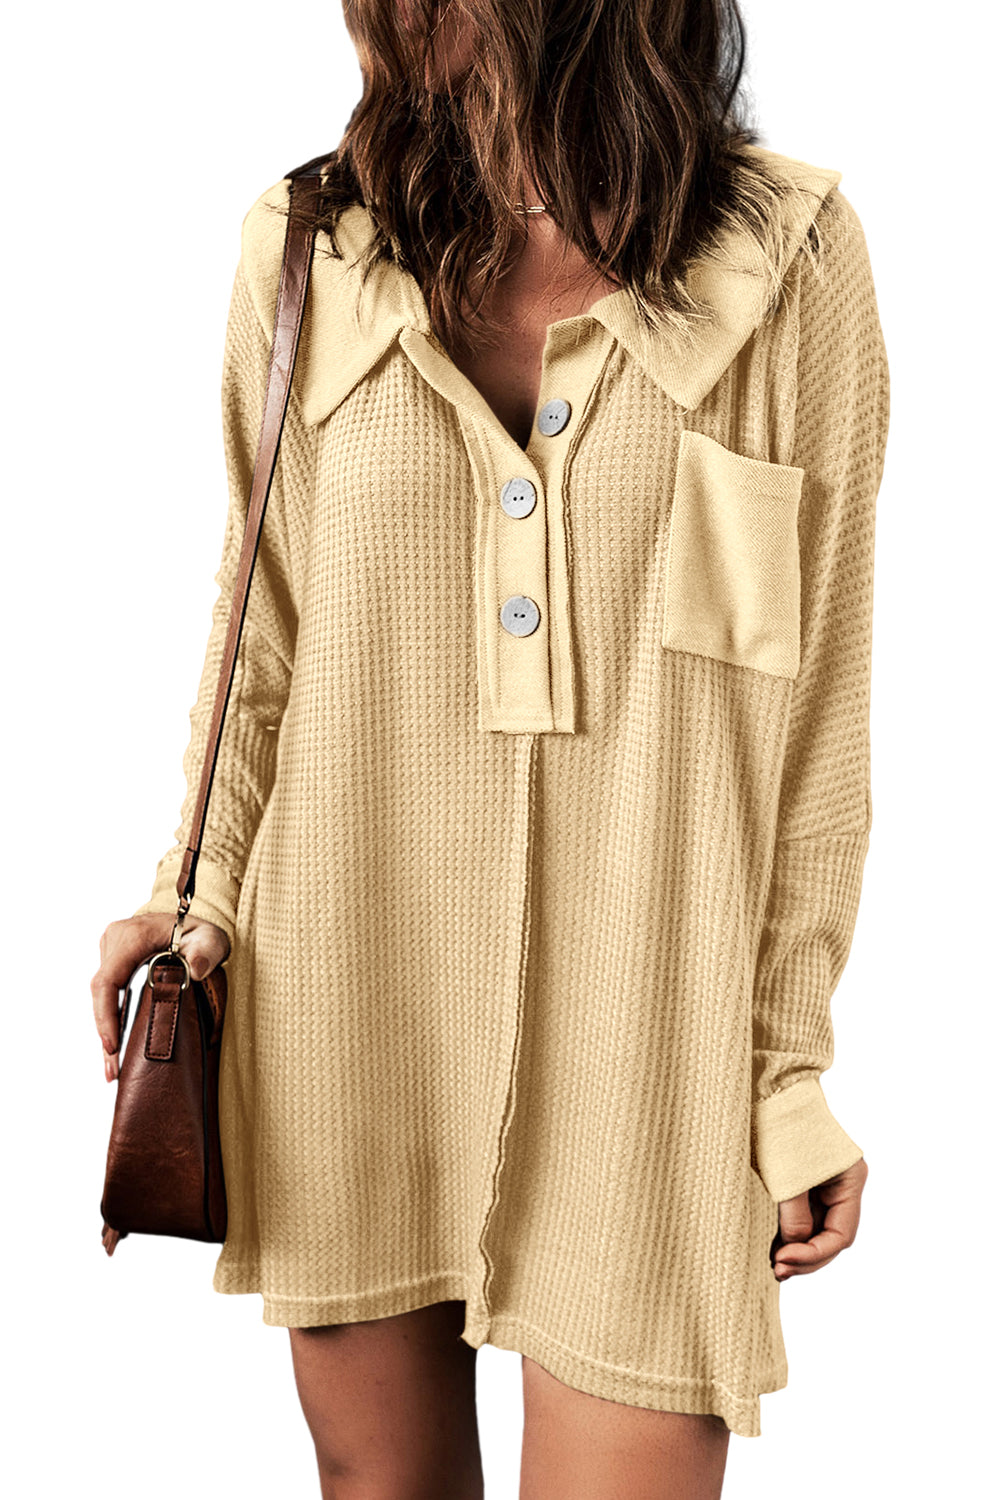 Apricot Waffle Knit Buttoned Long Sleeve Top